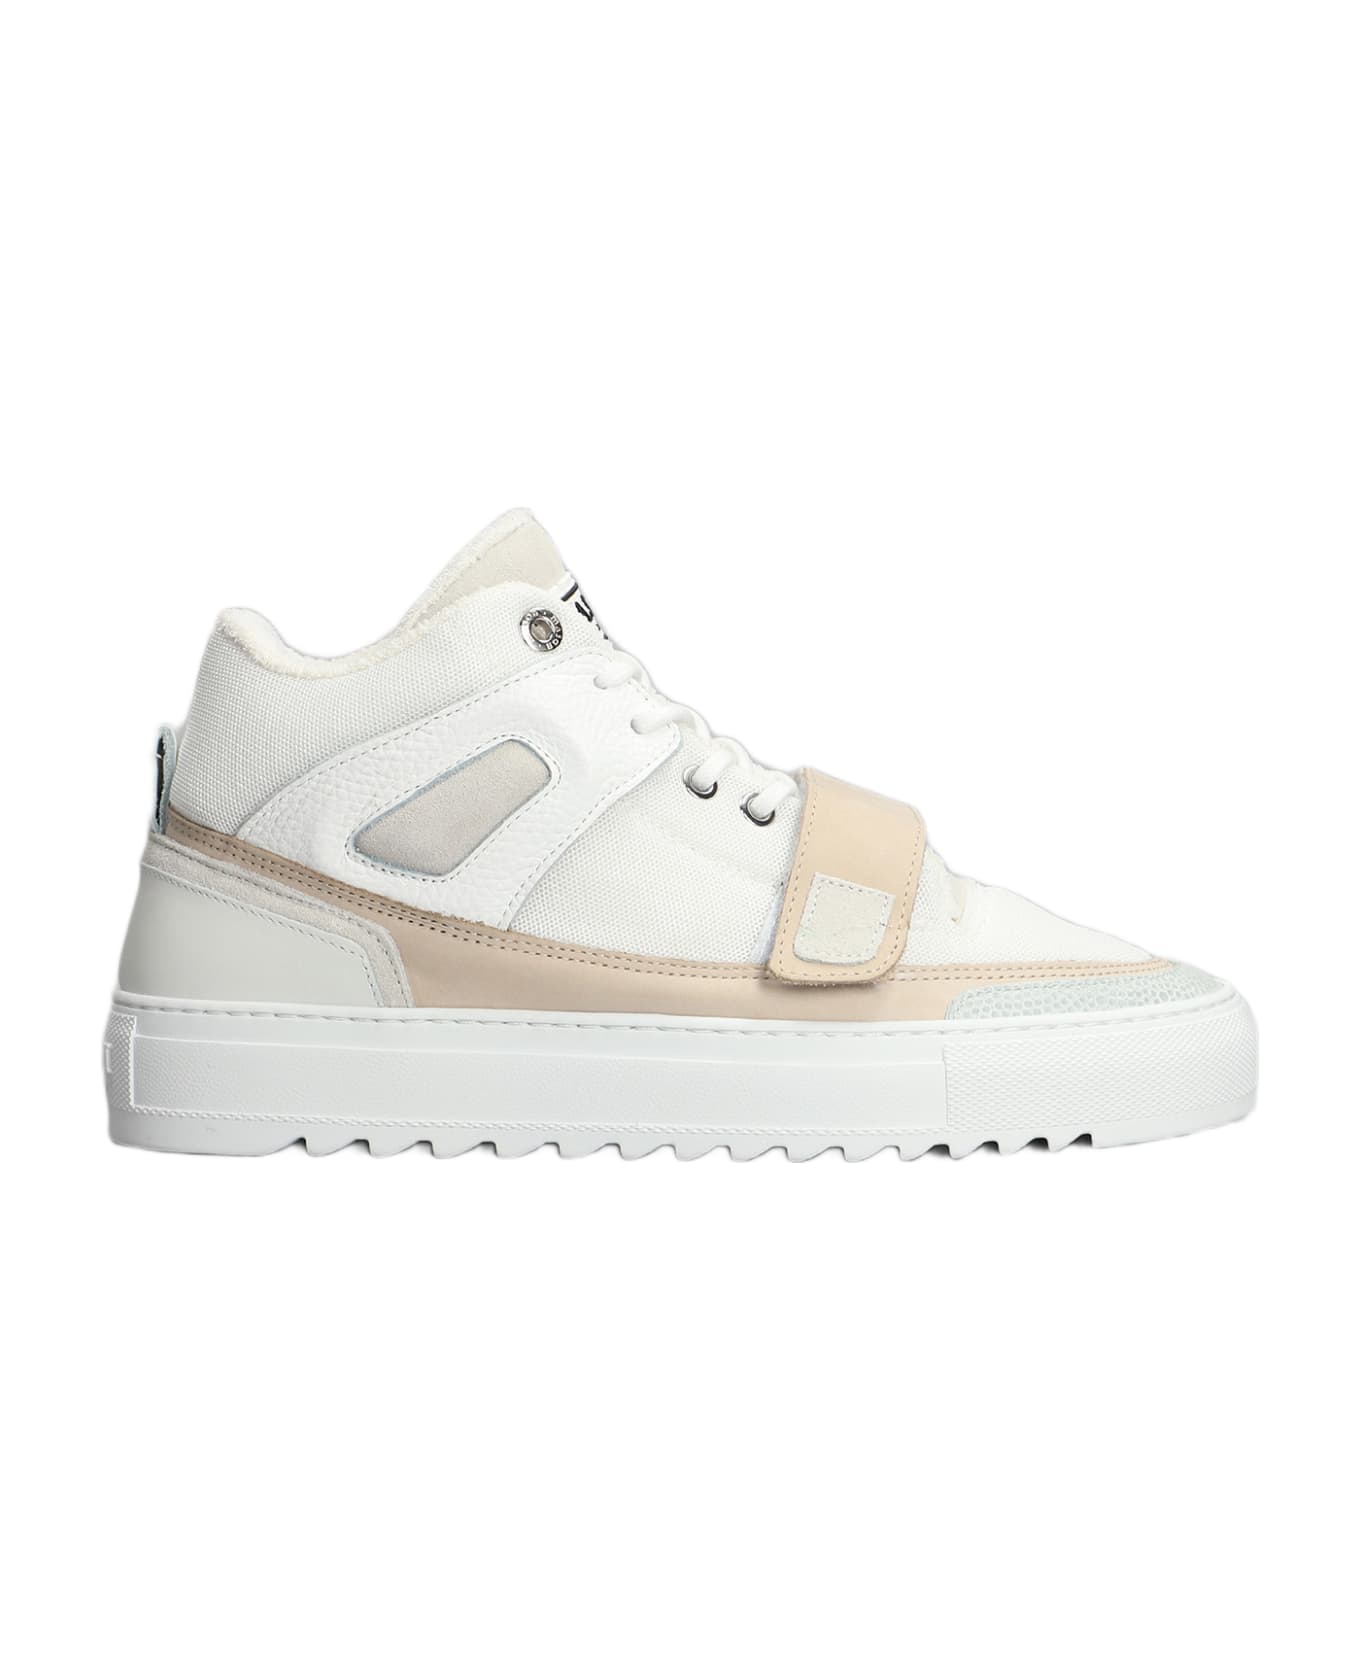 Mason Garments Firenze Mid Sneakers In White Leather And Fabric - White